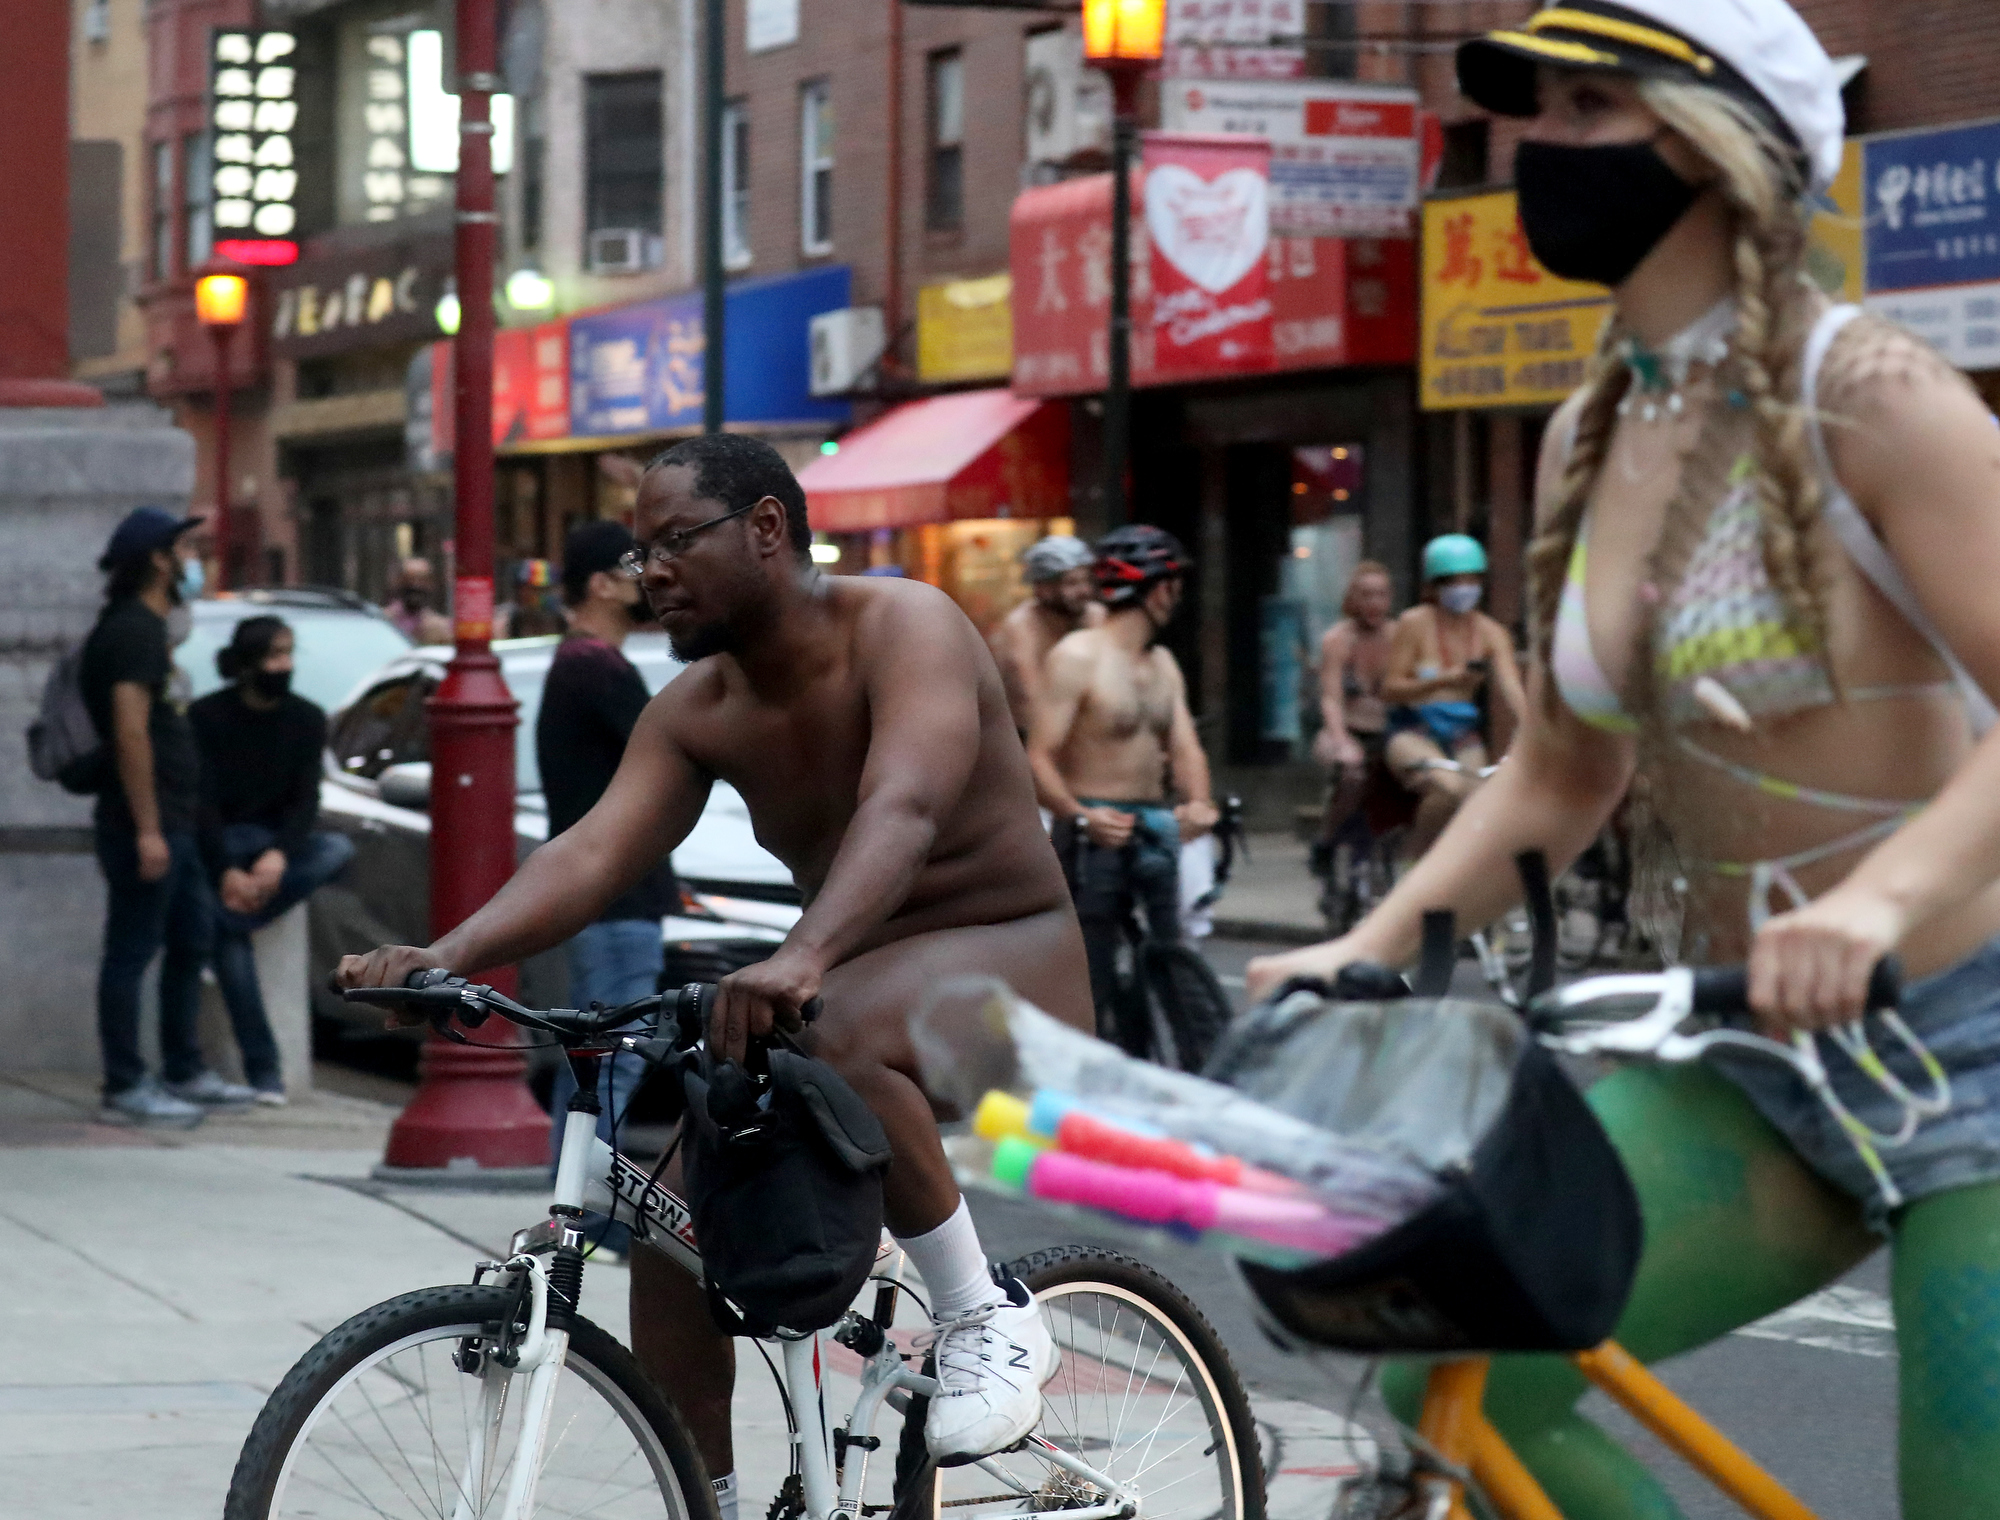 Philly Naked Bike Ride participants turn from 10th Street to Arch Street in Philadelphia, Saturday, Aug. 28, 2021.